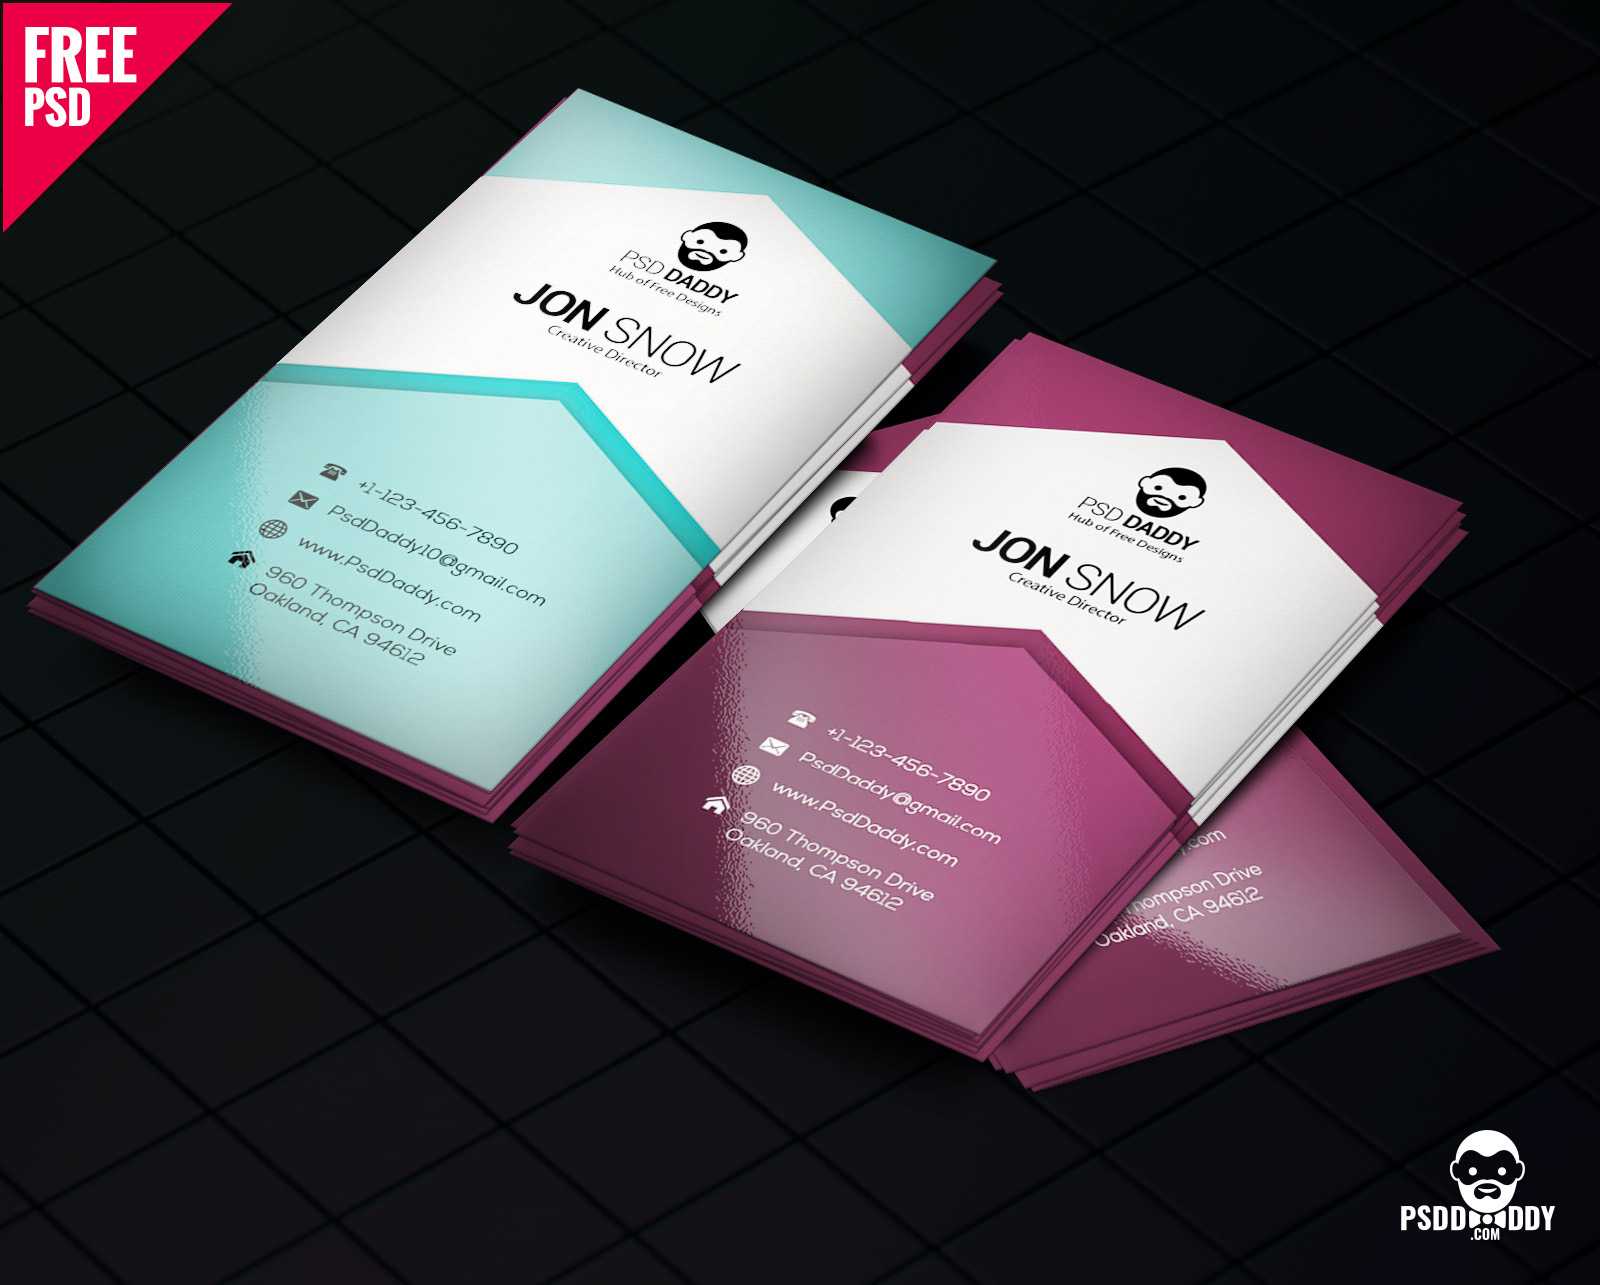 Download]Creative Business Card Psd Free | Psddaddy Regarding Business Card Template Size Photoshop